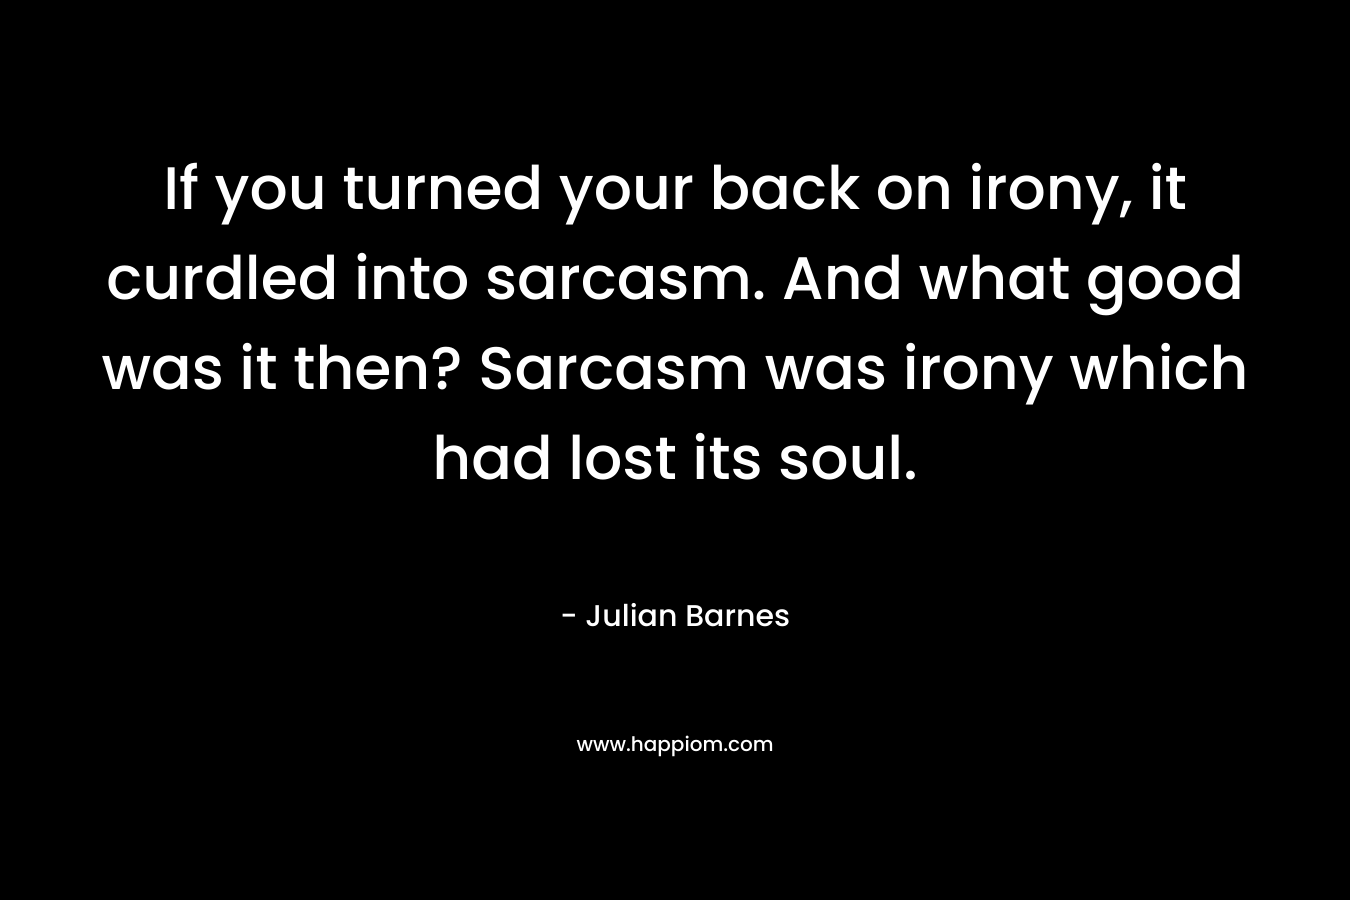 If you turned your back on irony, it curdled into sarcasm. And what good was it then? Sarcasm was irony which had lost its soul. – Julian Barnes